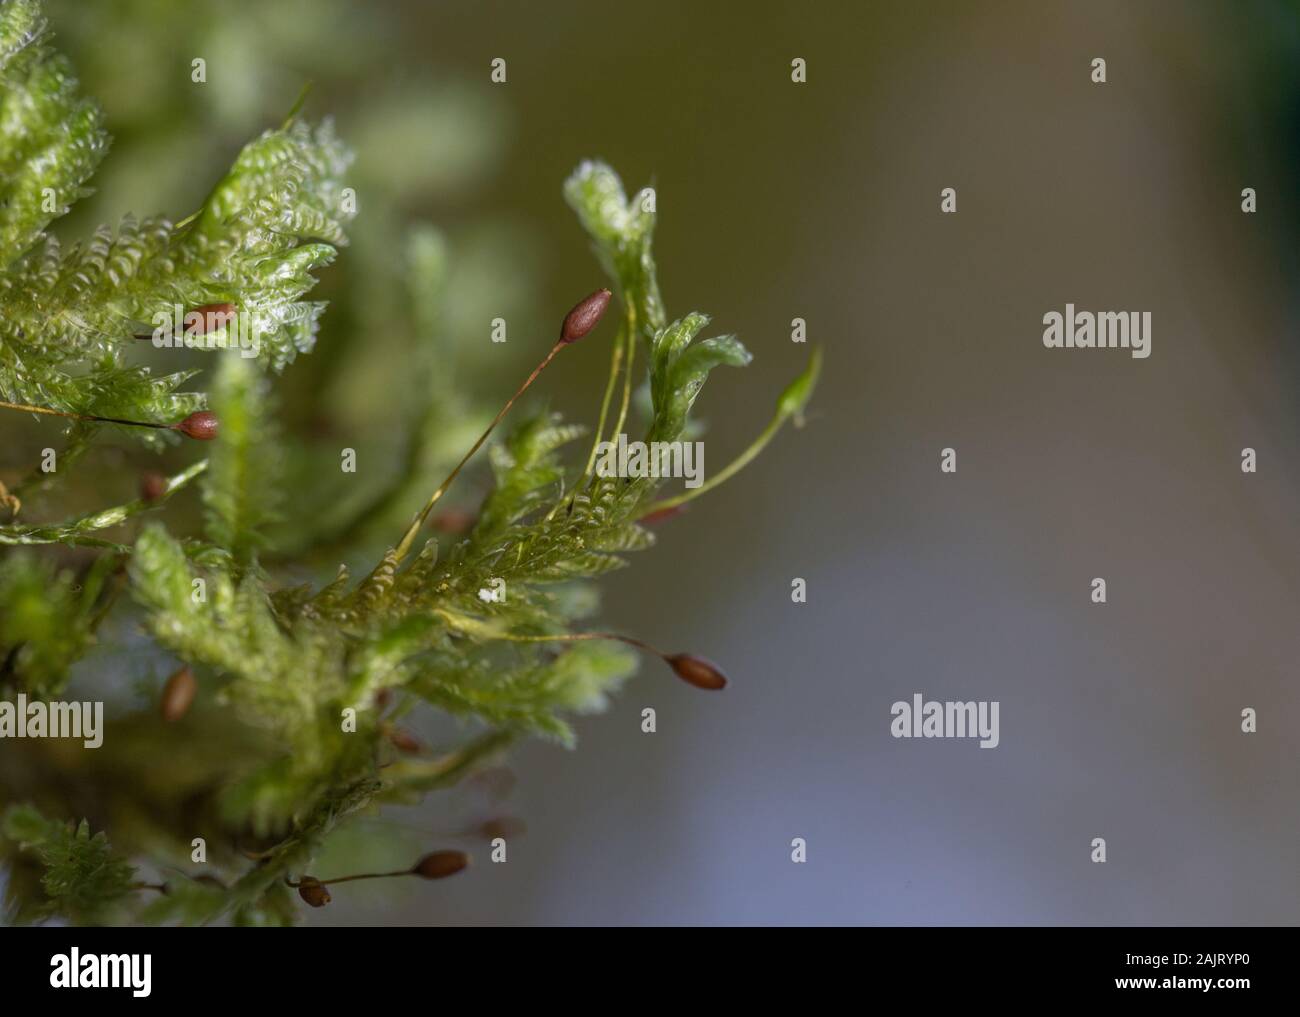 Moss Neckera pumila in old-growth primary forest in Carpathian Mountains. Macro photo. Stock Photo